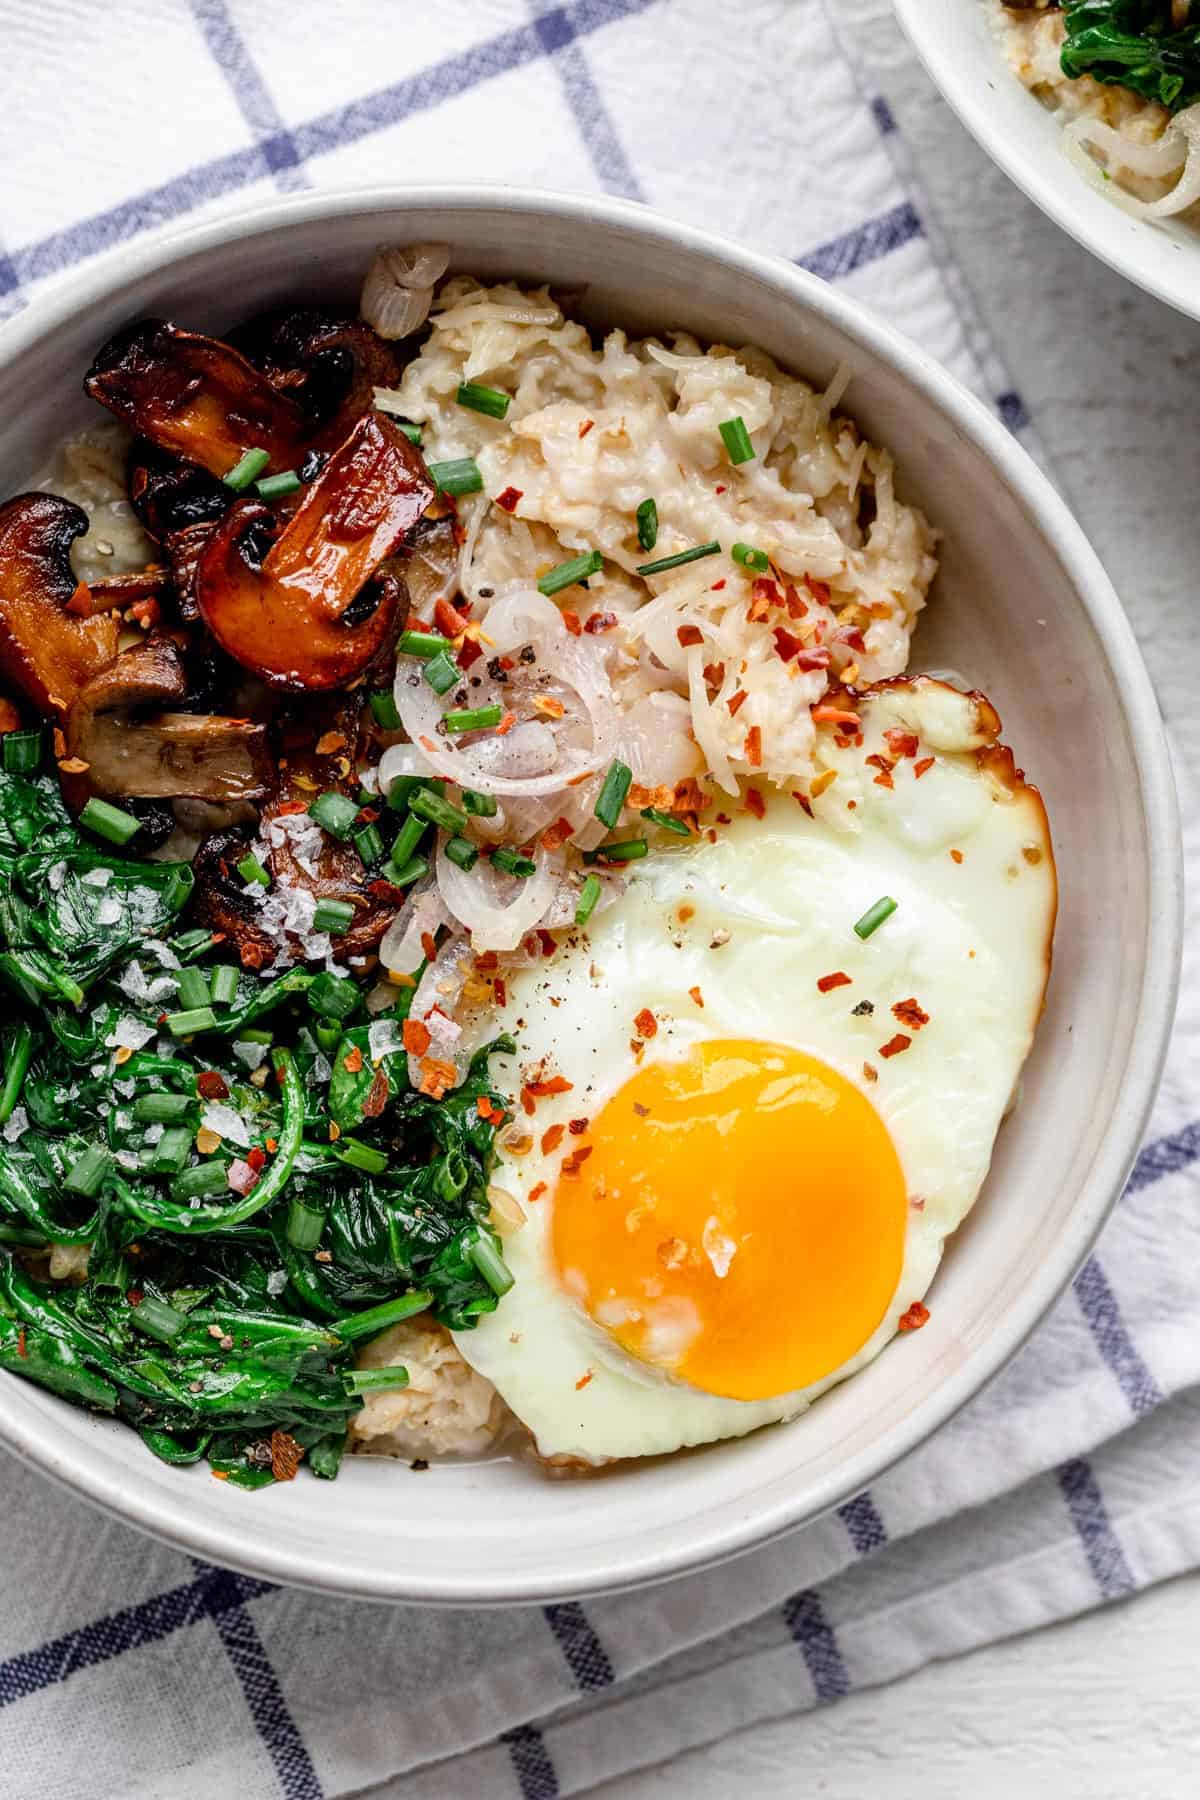 Close up shot of a savory bowl of oatmeal topped with a fried egg and vegetables